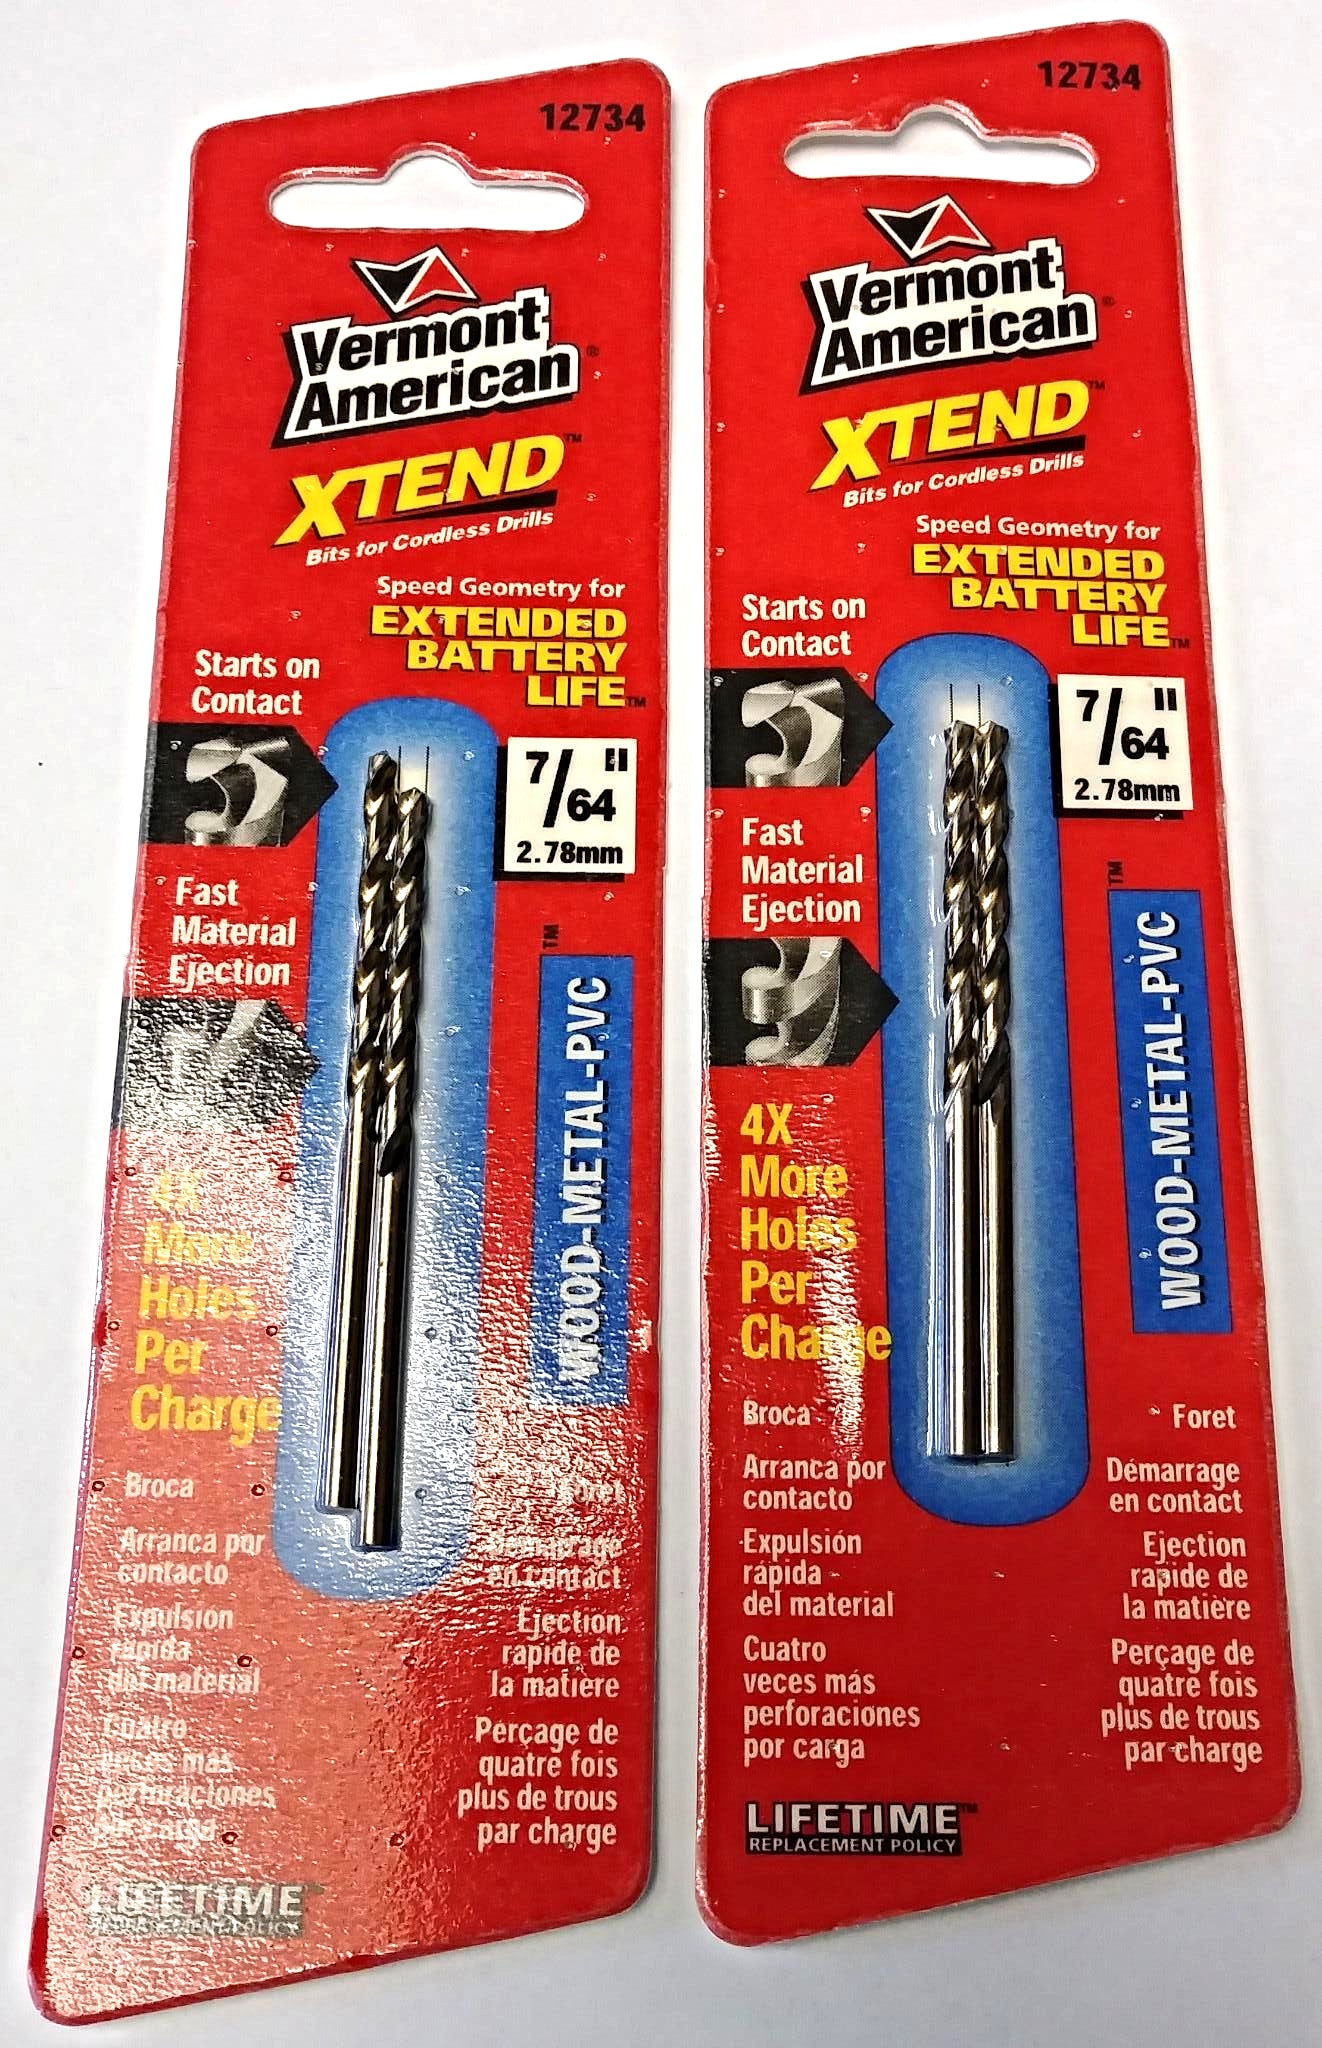 Vermont American 12734 7/64" XTEND Fractional Drill Bits (2 Packs of 2)